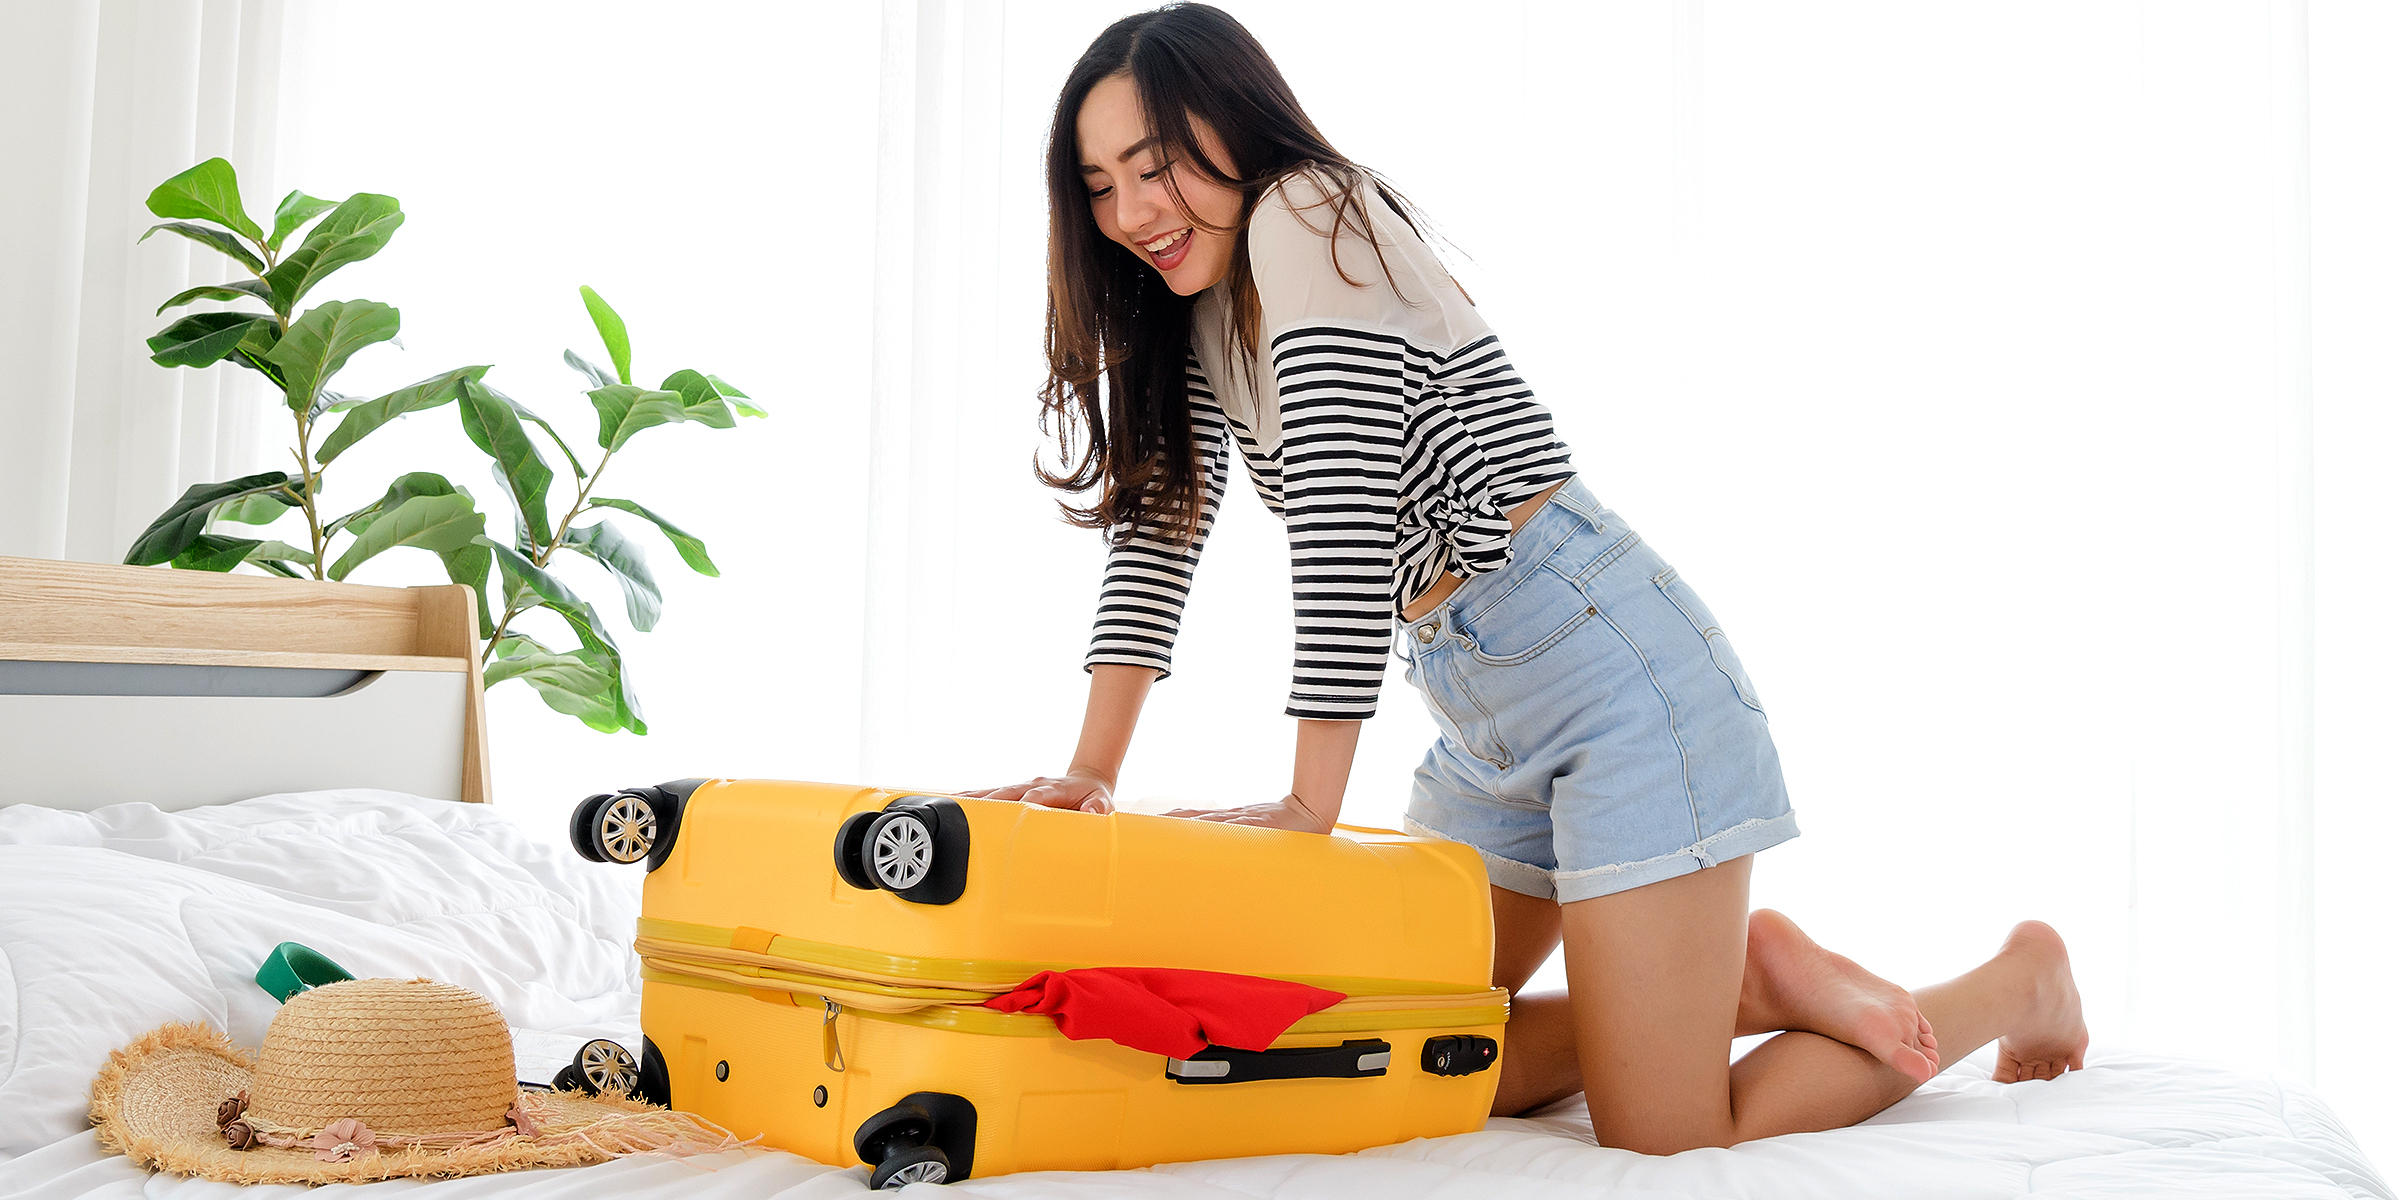 A woman packs her suitcase | Source: Shutterstock